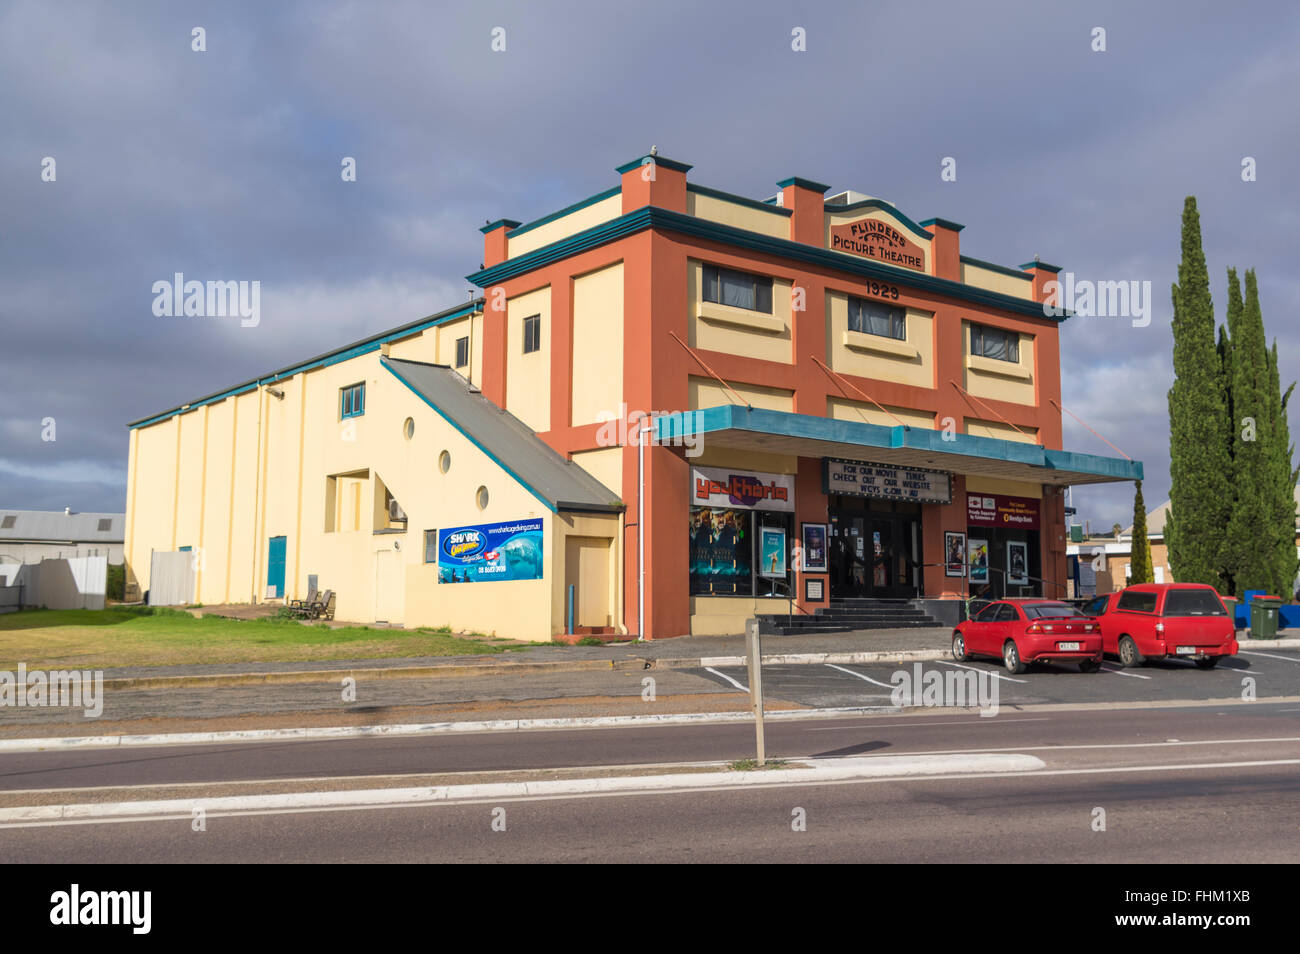 Flinders Picture Theatre, located on Hallett Pl, Port Lincoln, South Australia. The cinema building dates back to 1929. Stock Photo